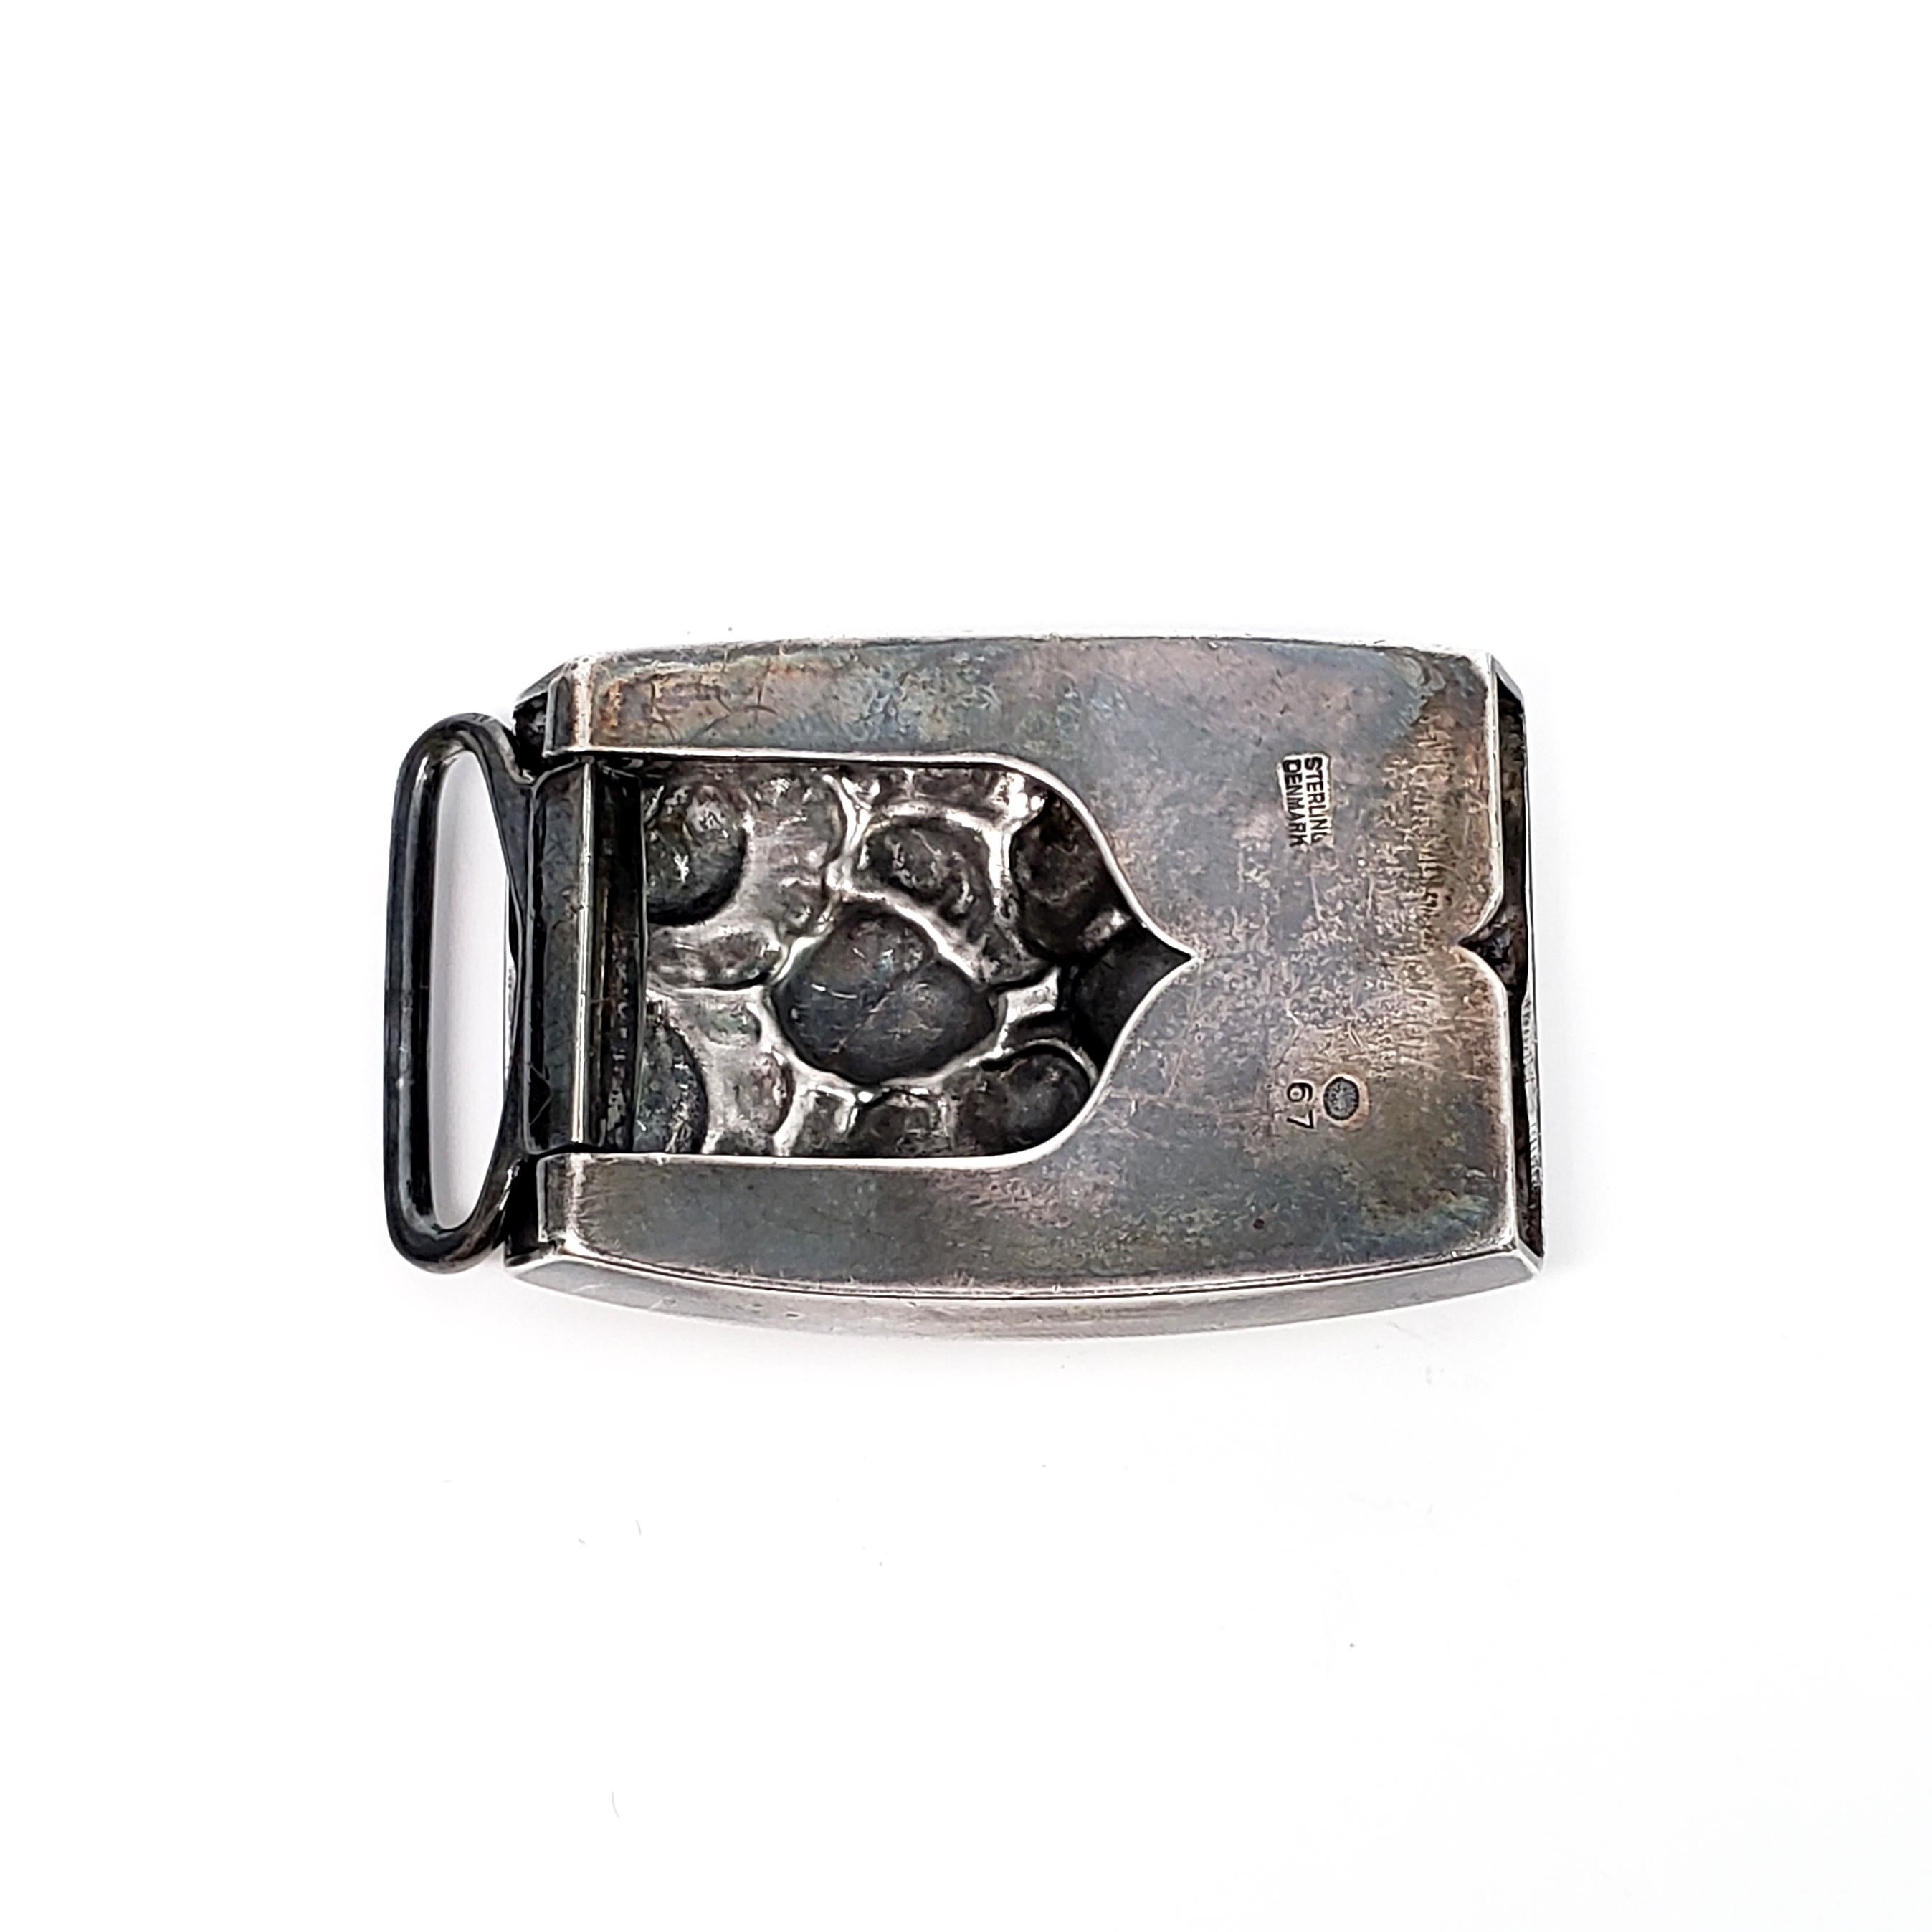 Antique sterling silver belt buckle from Georg Jensen in the Acorn pattern #67, circa 1915-1927.

The Acorn pattern was introduced in 1915 as a collaboration between Georg Jensen and designer Johan Ronde. The pattern combines Art Nouveau and Art